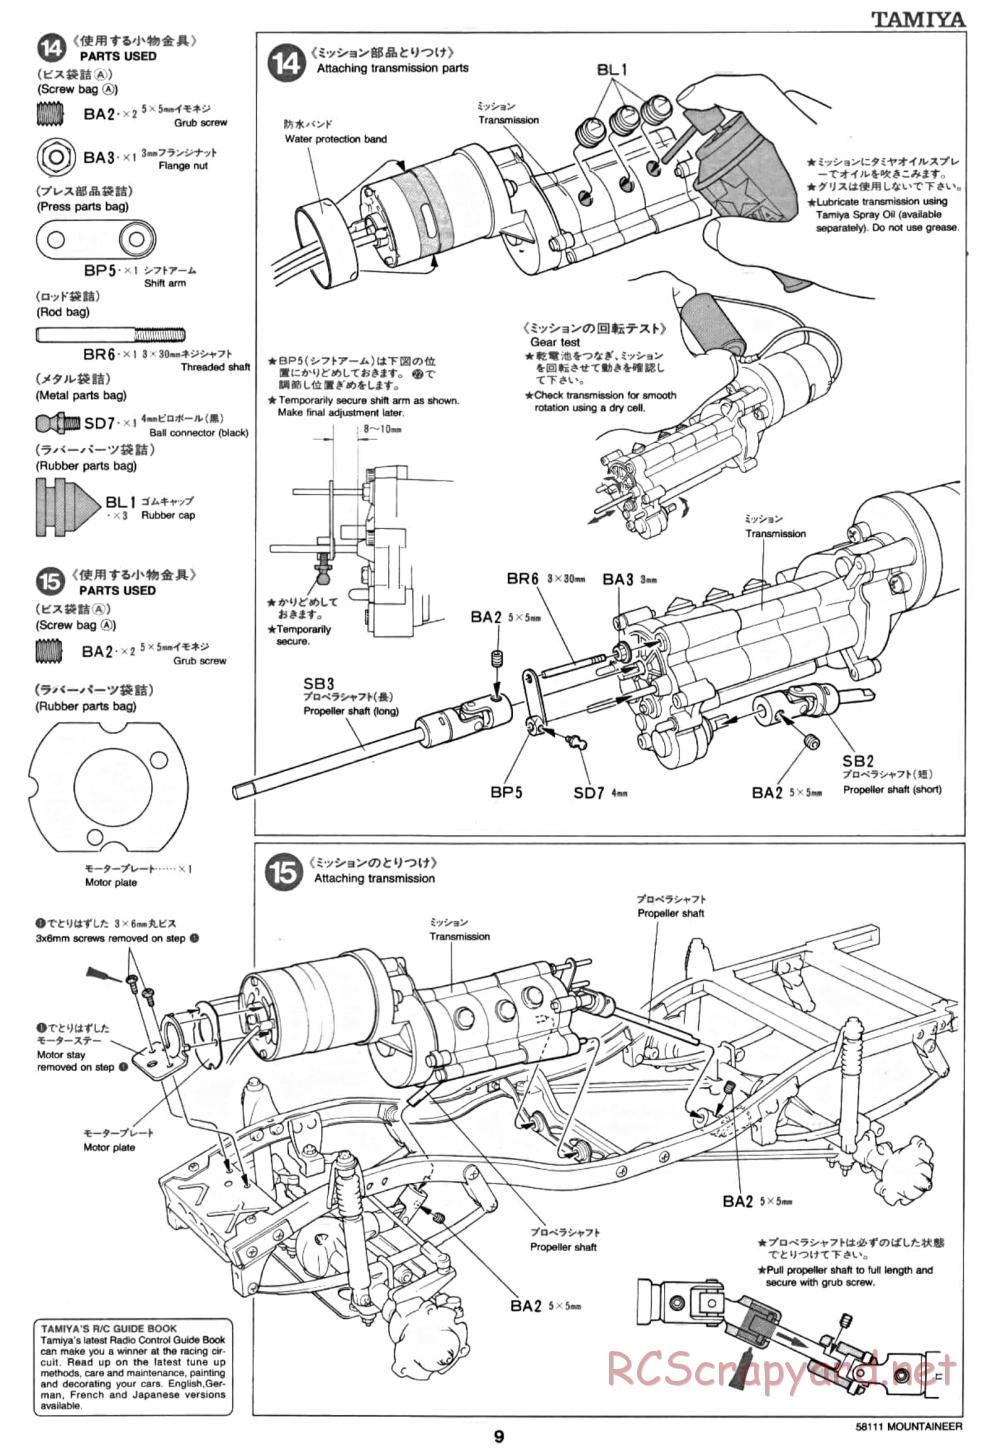 Tamiya - Toyota 4x4 Pick Up Mountaineer Chassis - Manual - Page 9